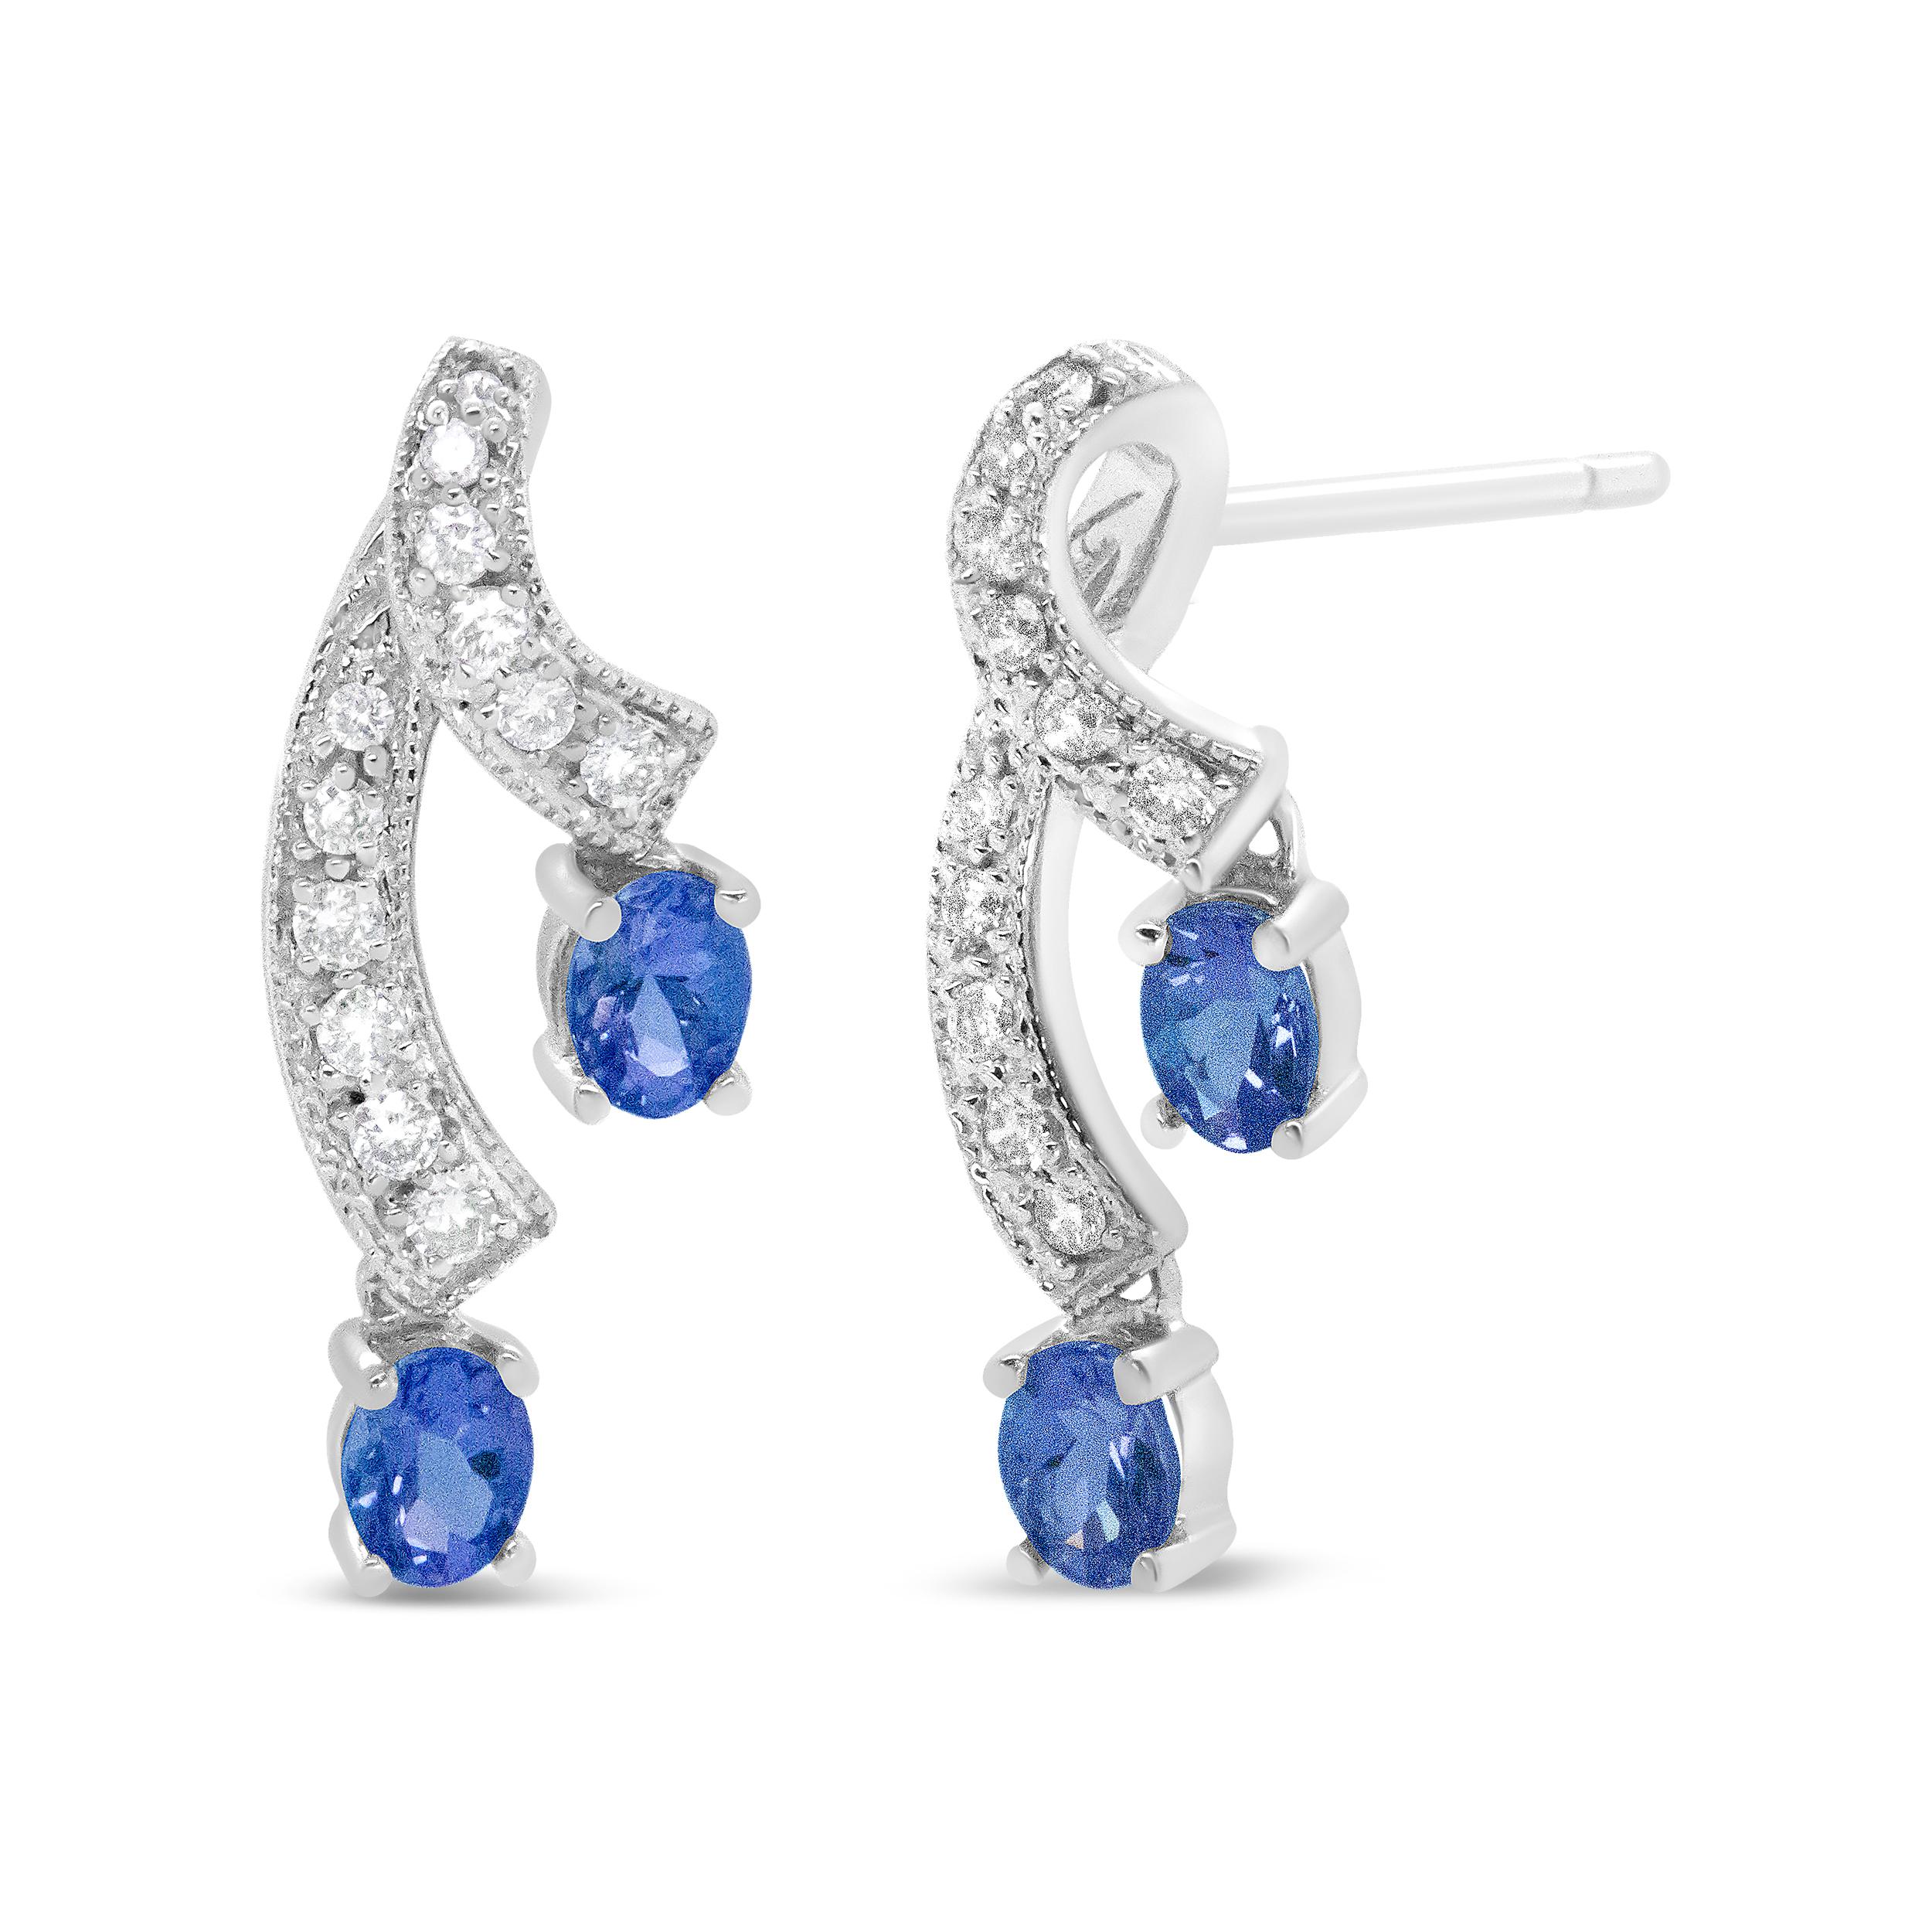 These unique earrings are sure to turn heads. Each earring features two ribbons of diamond accented 14K White Gold weaving through down your ear. The diamond studded ribbons end with 4 beautiful, natural blue tanzanite stones. Radiating a glorious